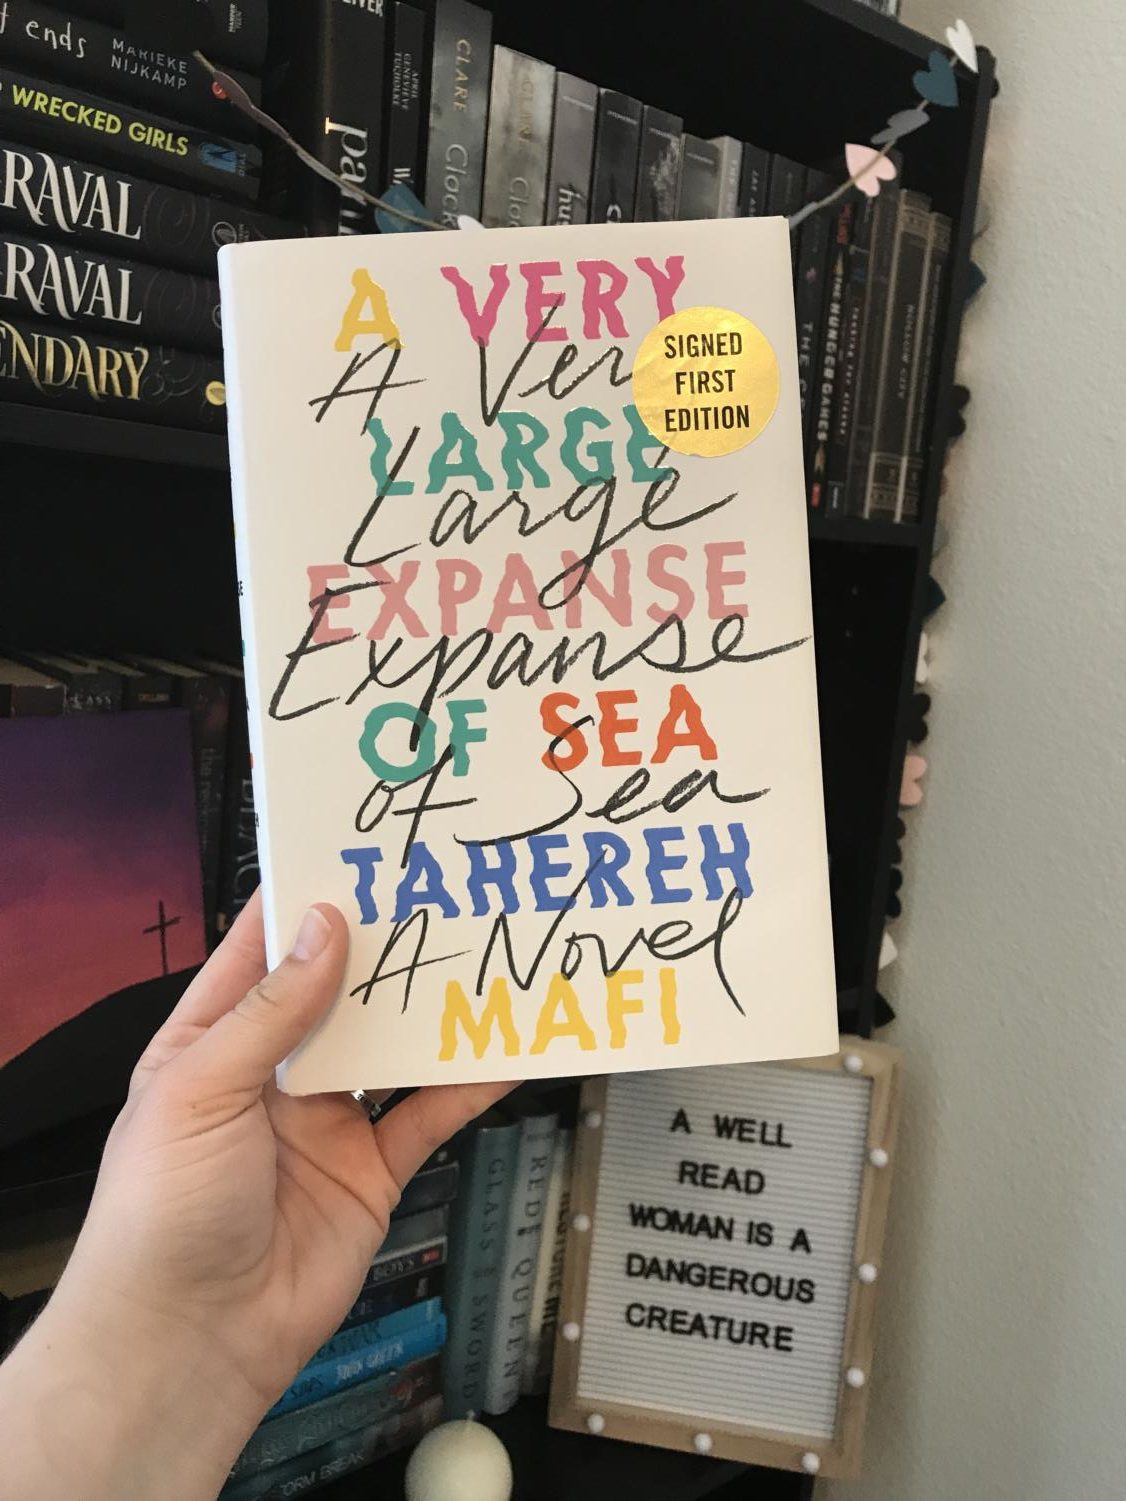 a very large expanse of sea book review